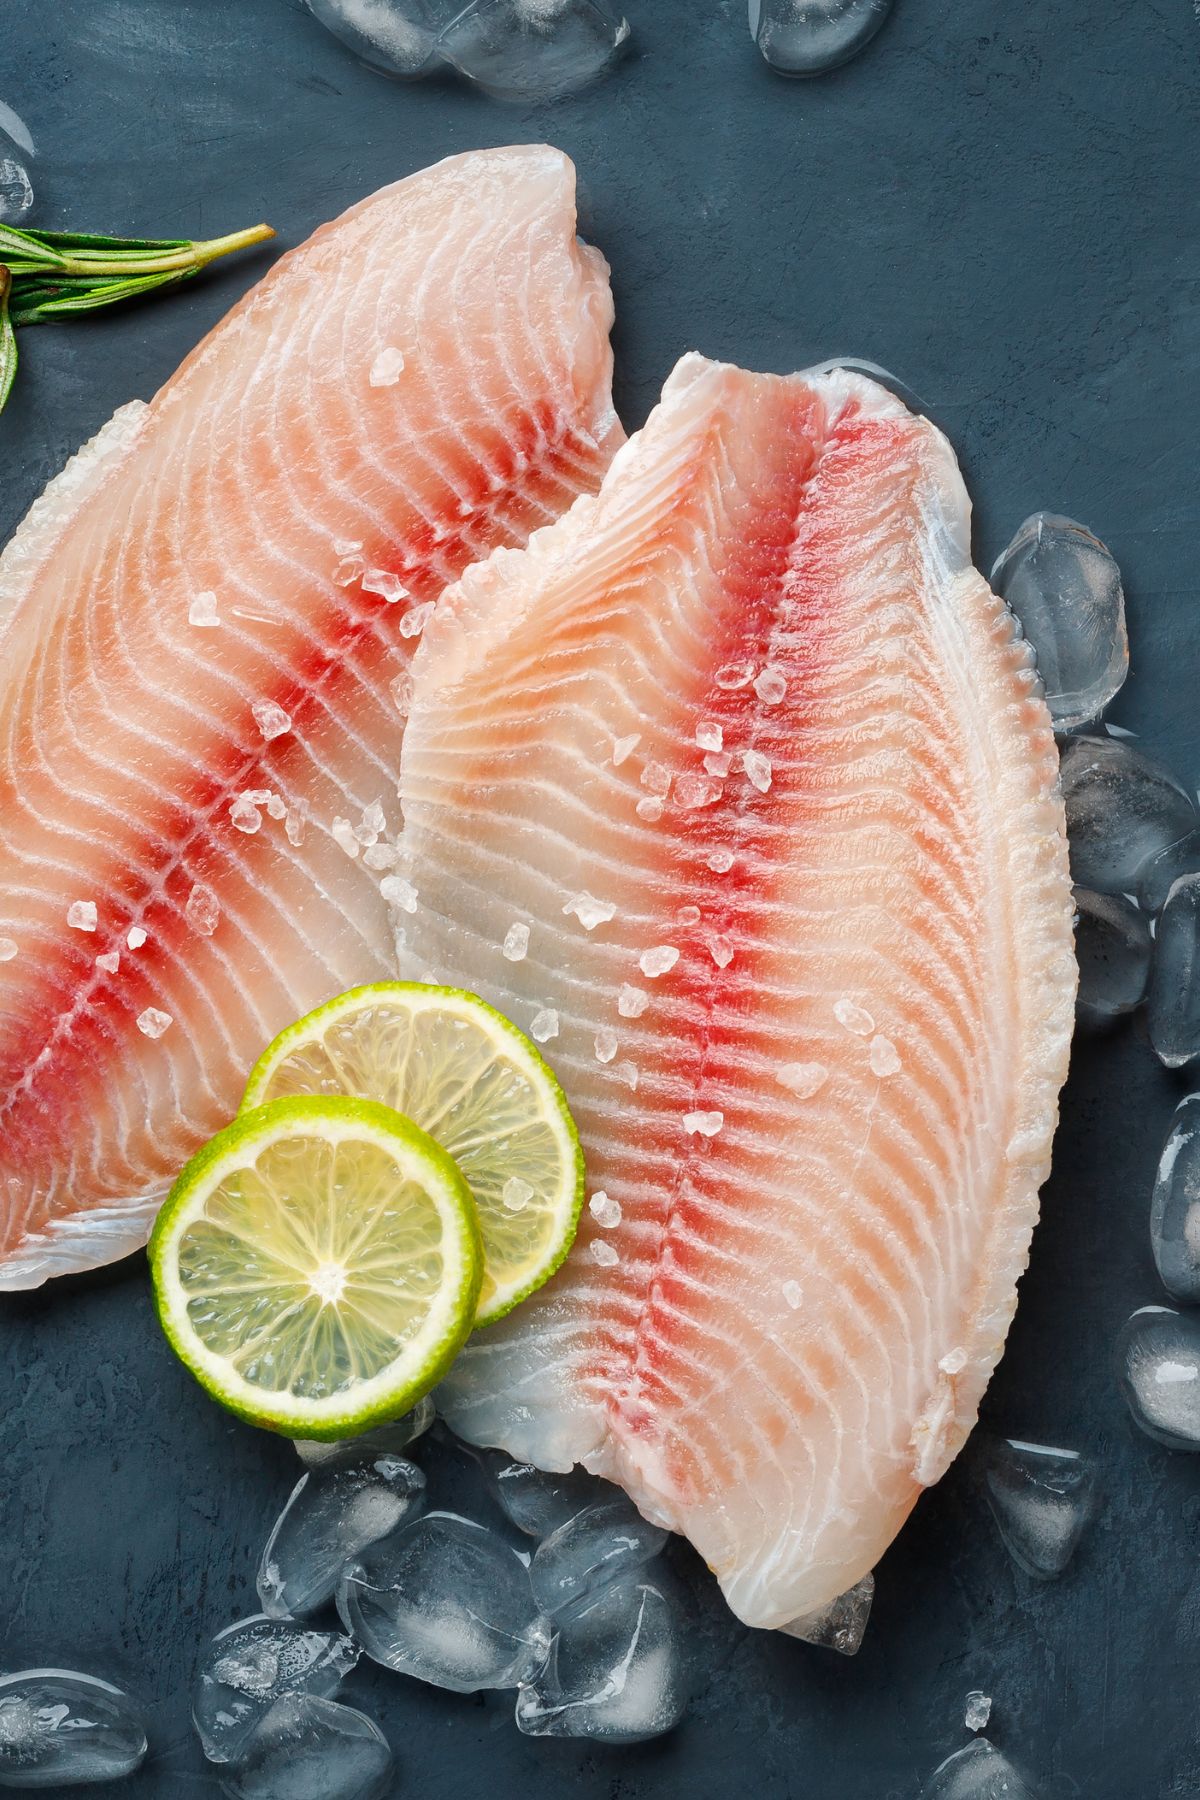 Sea bass fillets with ice cubes, salt and lime slices.